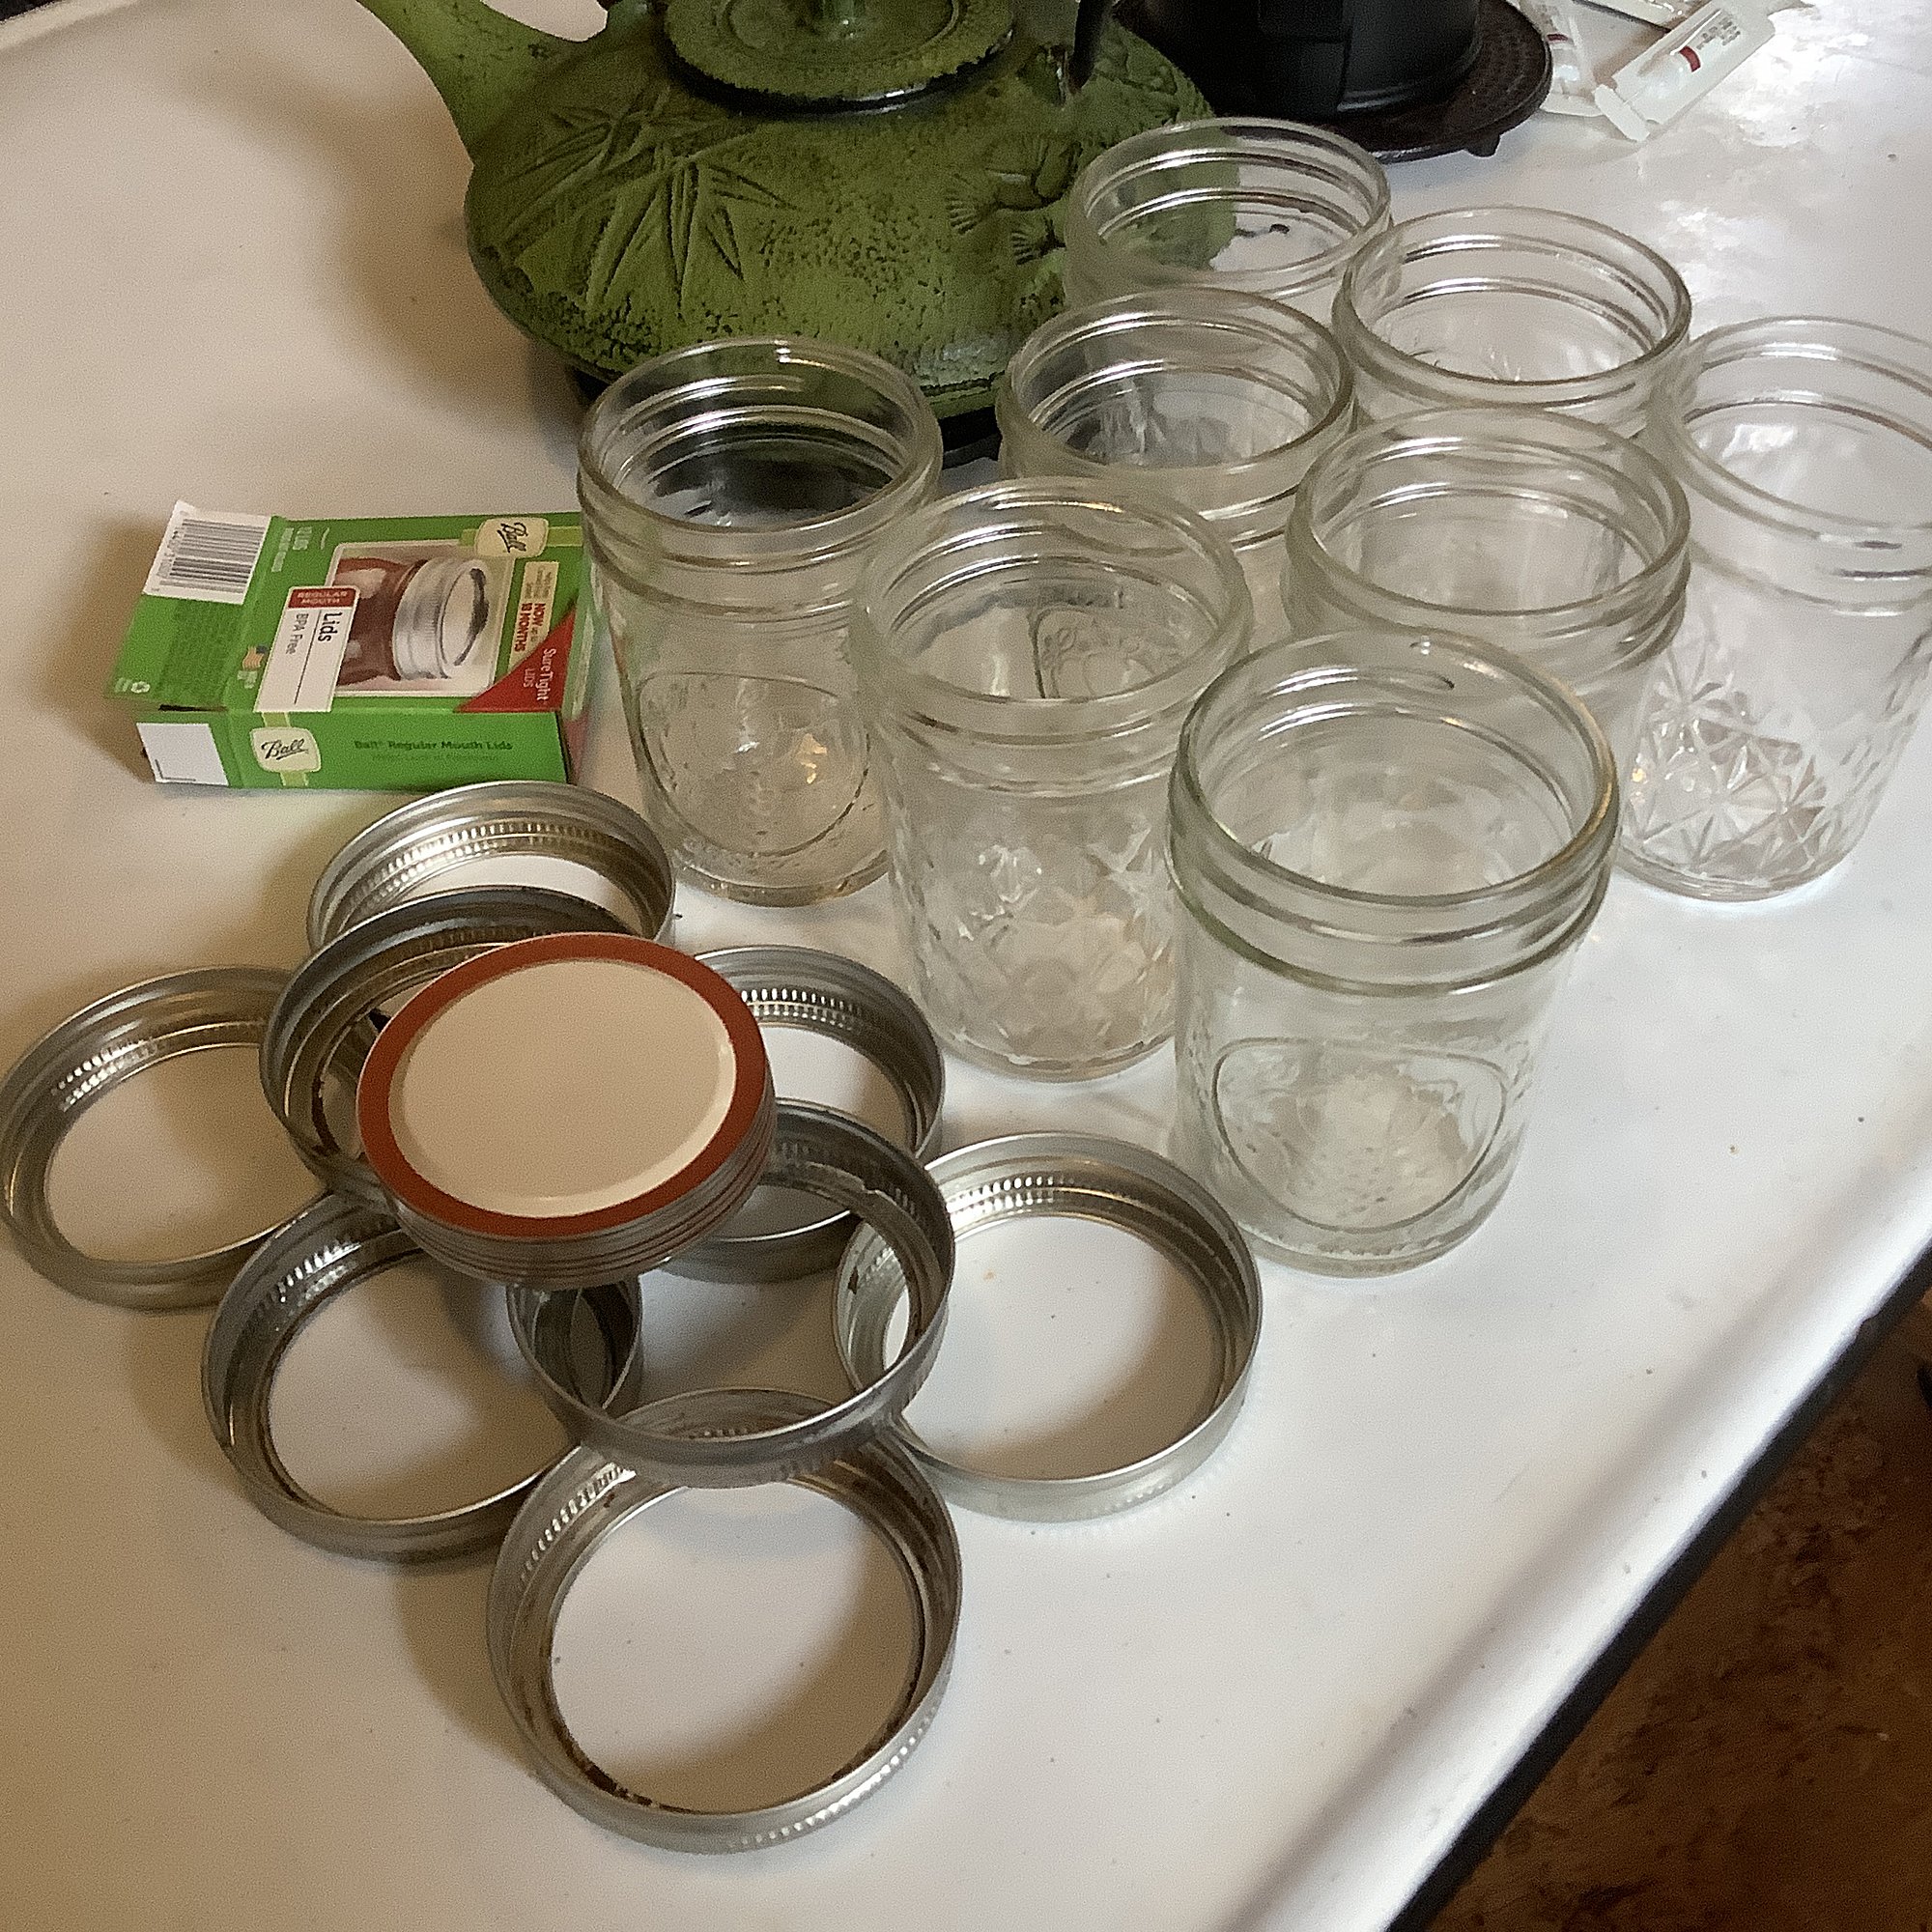 Start by sterilizing your canning equipment.